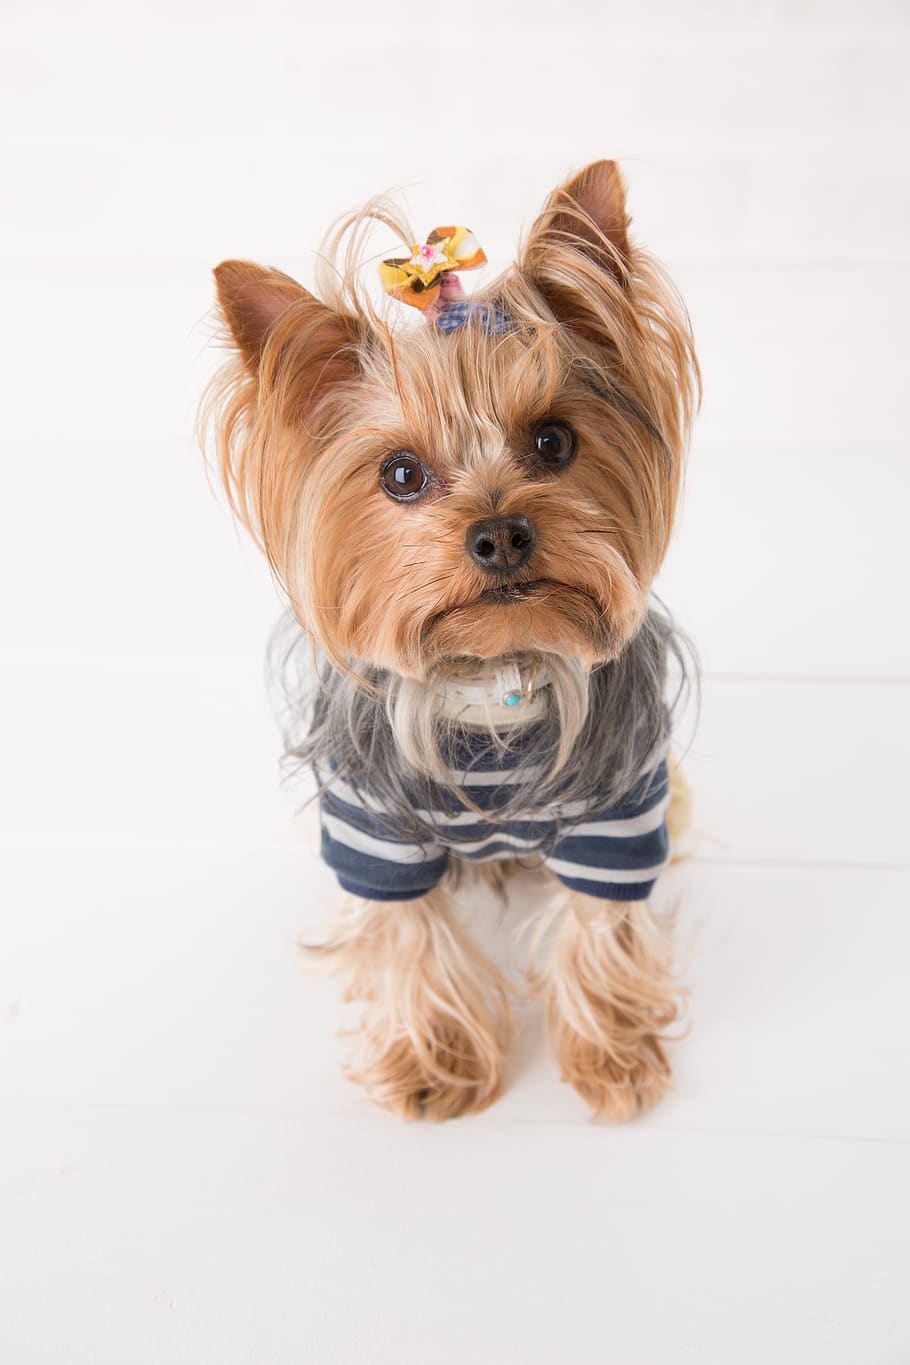 yorkie, dog, yorkshire, yorkshire terrier, pet, cute, small breed dogs, leia, address, pets